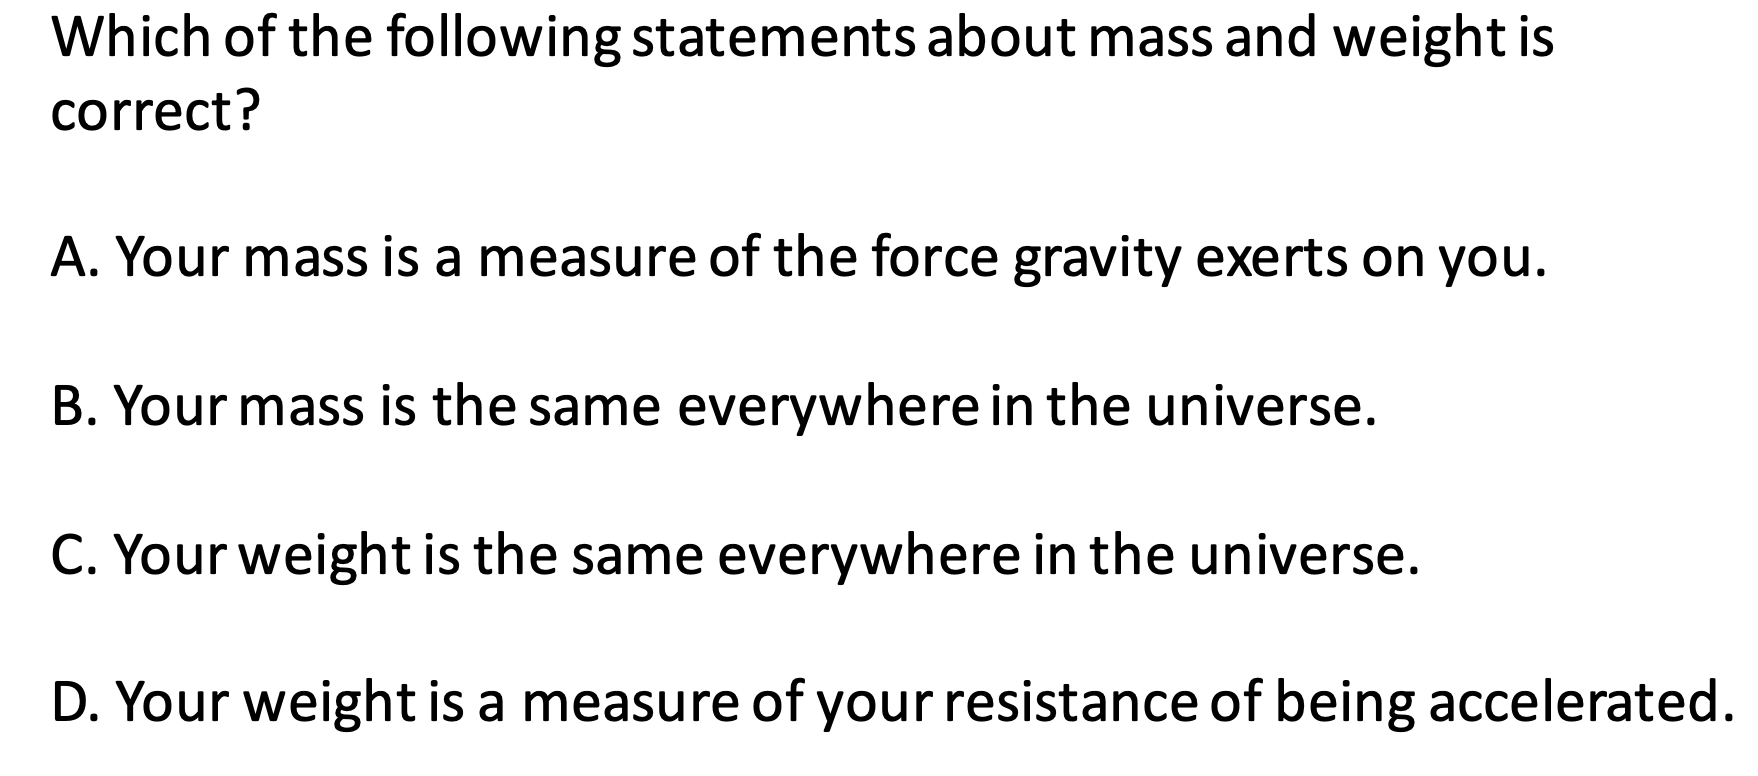 Which of the following statements about mass and weight is
correct?
A. Your mass is a measure of the force gravity exerts on you.
B. Your mass is the same everywhere in the universe.
C. Your weight is the same everywhere in the universe.
D. Your weight is a measure of your resistance of being accelerated.
